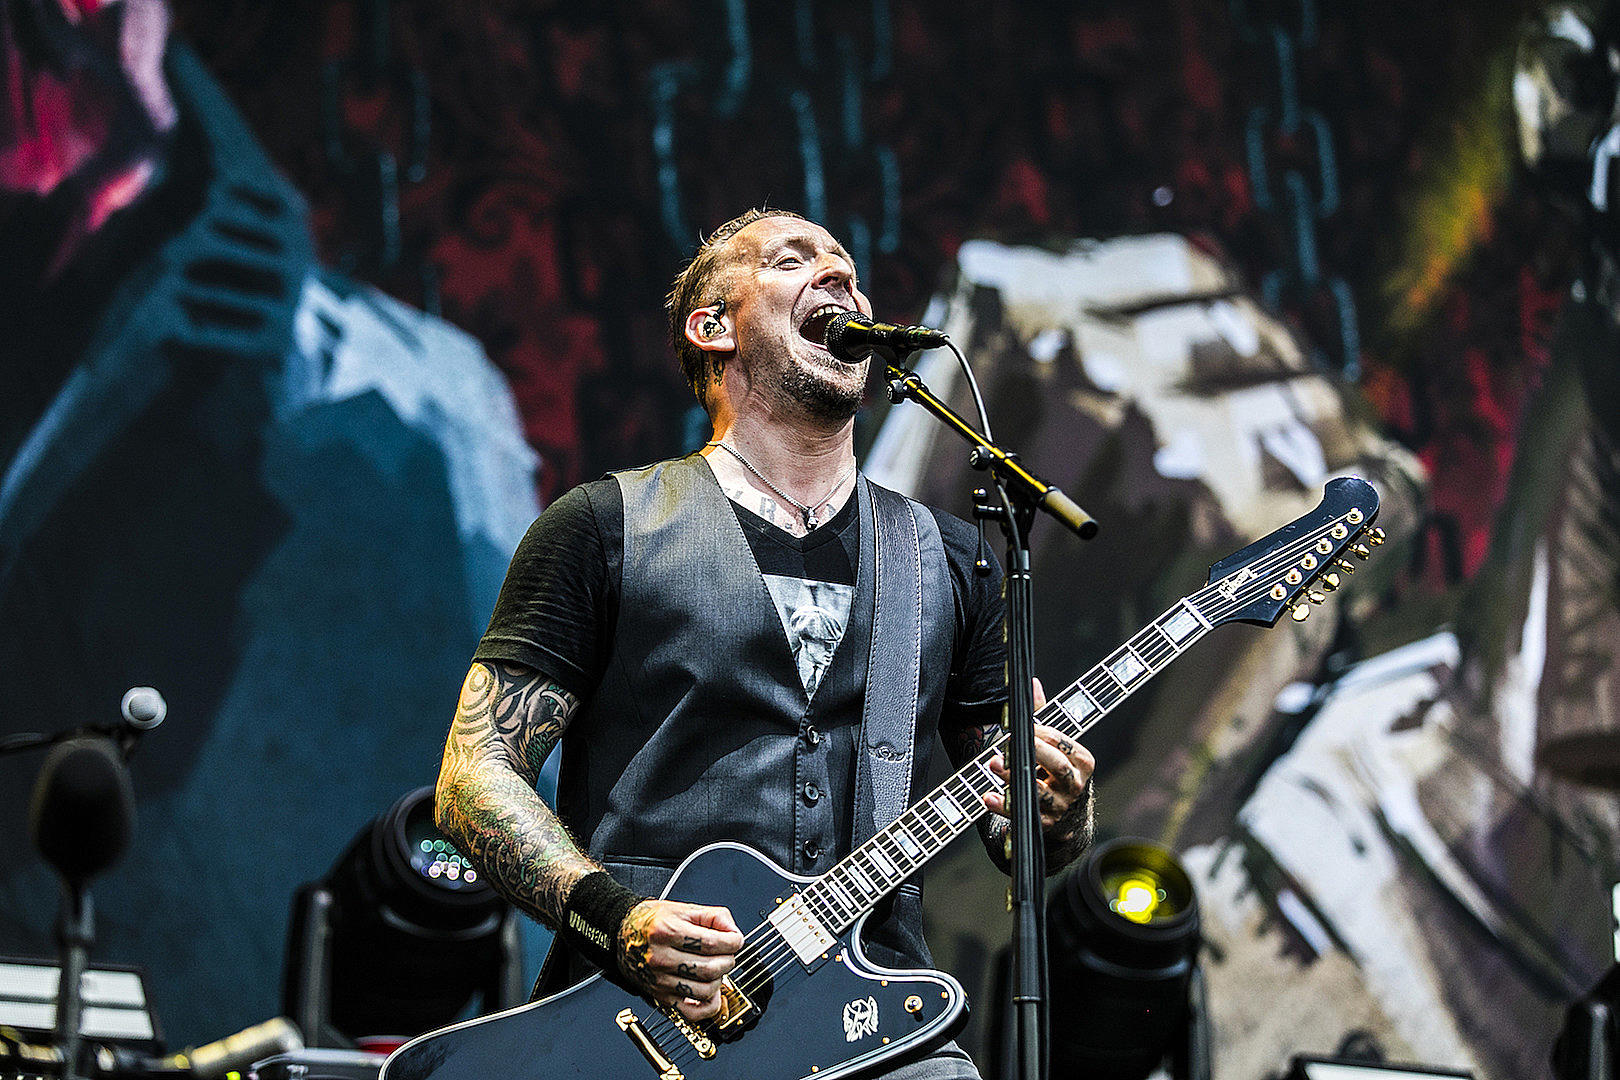 Volbeat To Rock Eastern Iowa This Summer With Bad Wolves